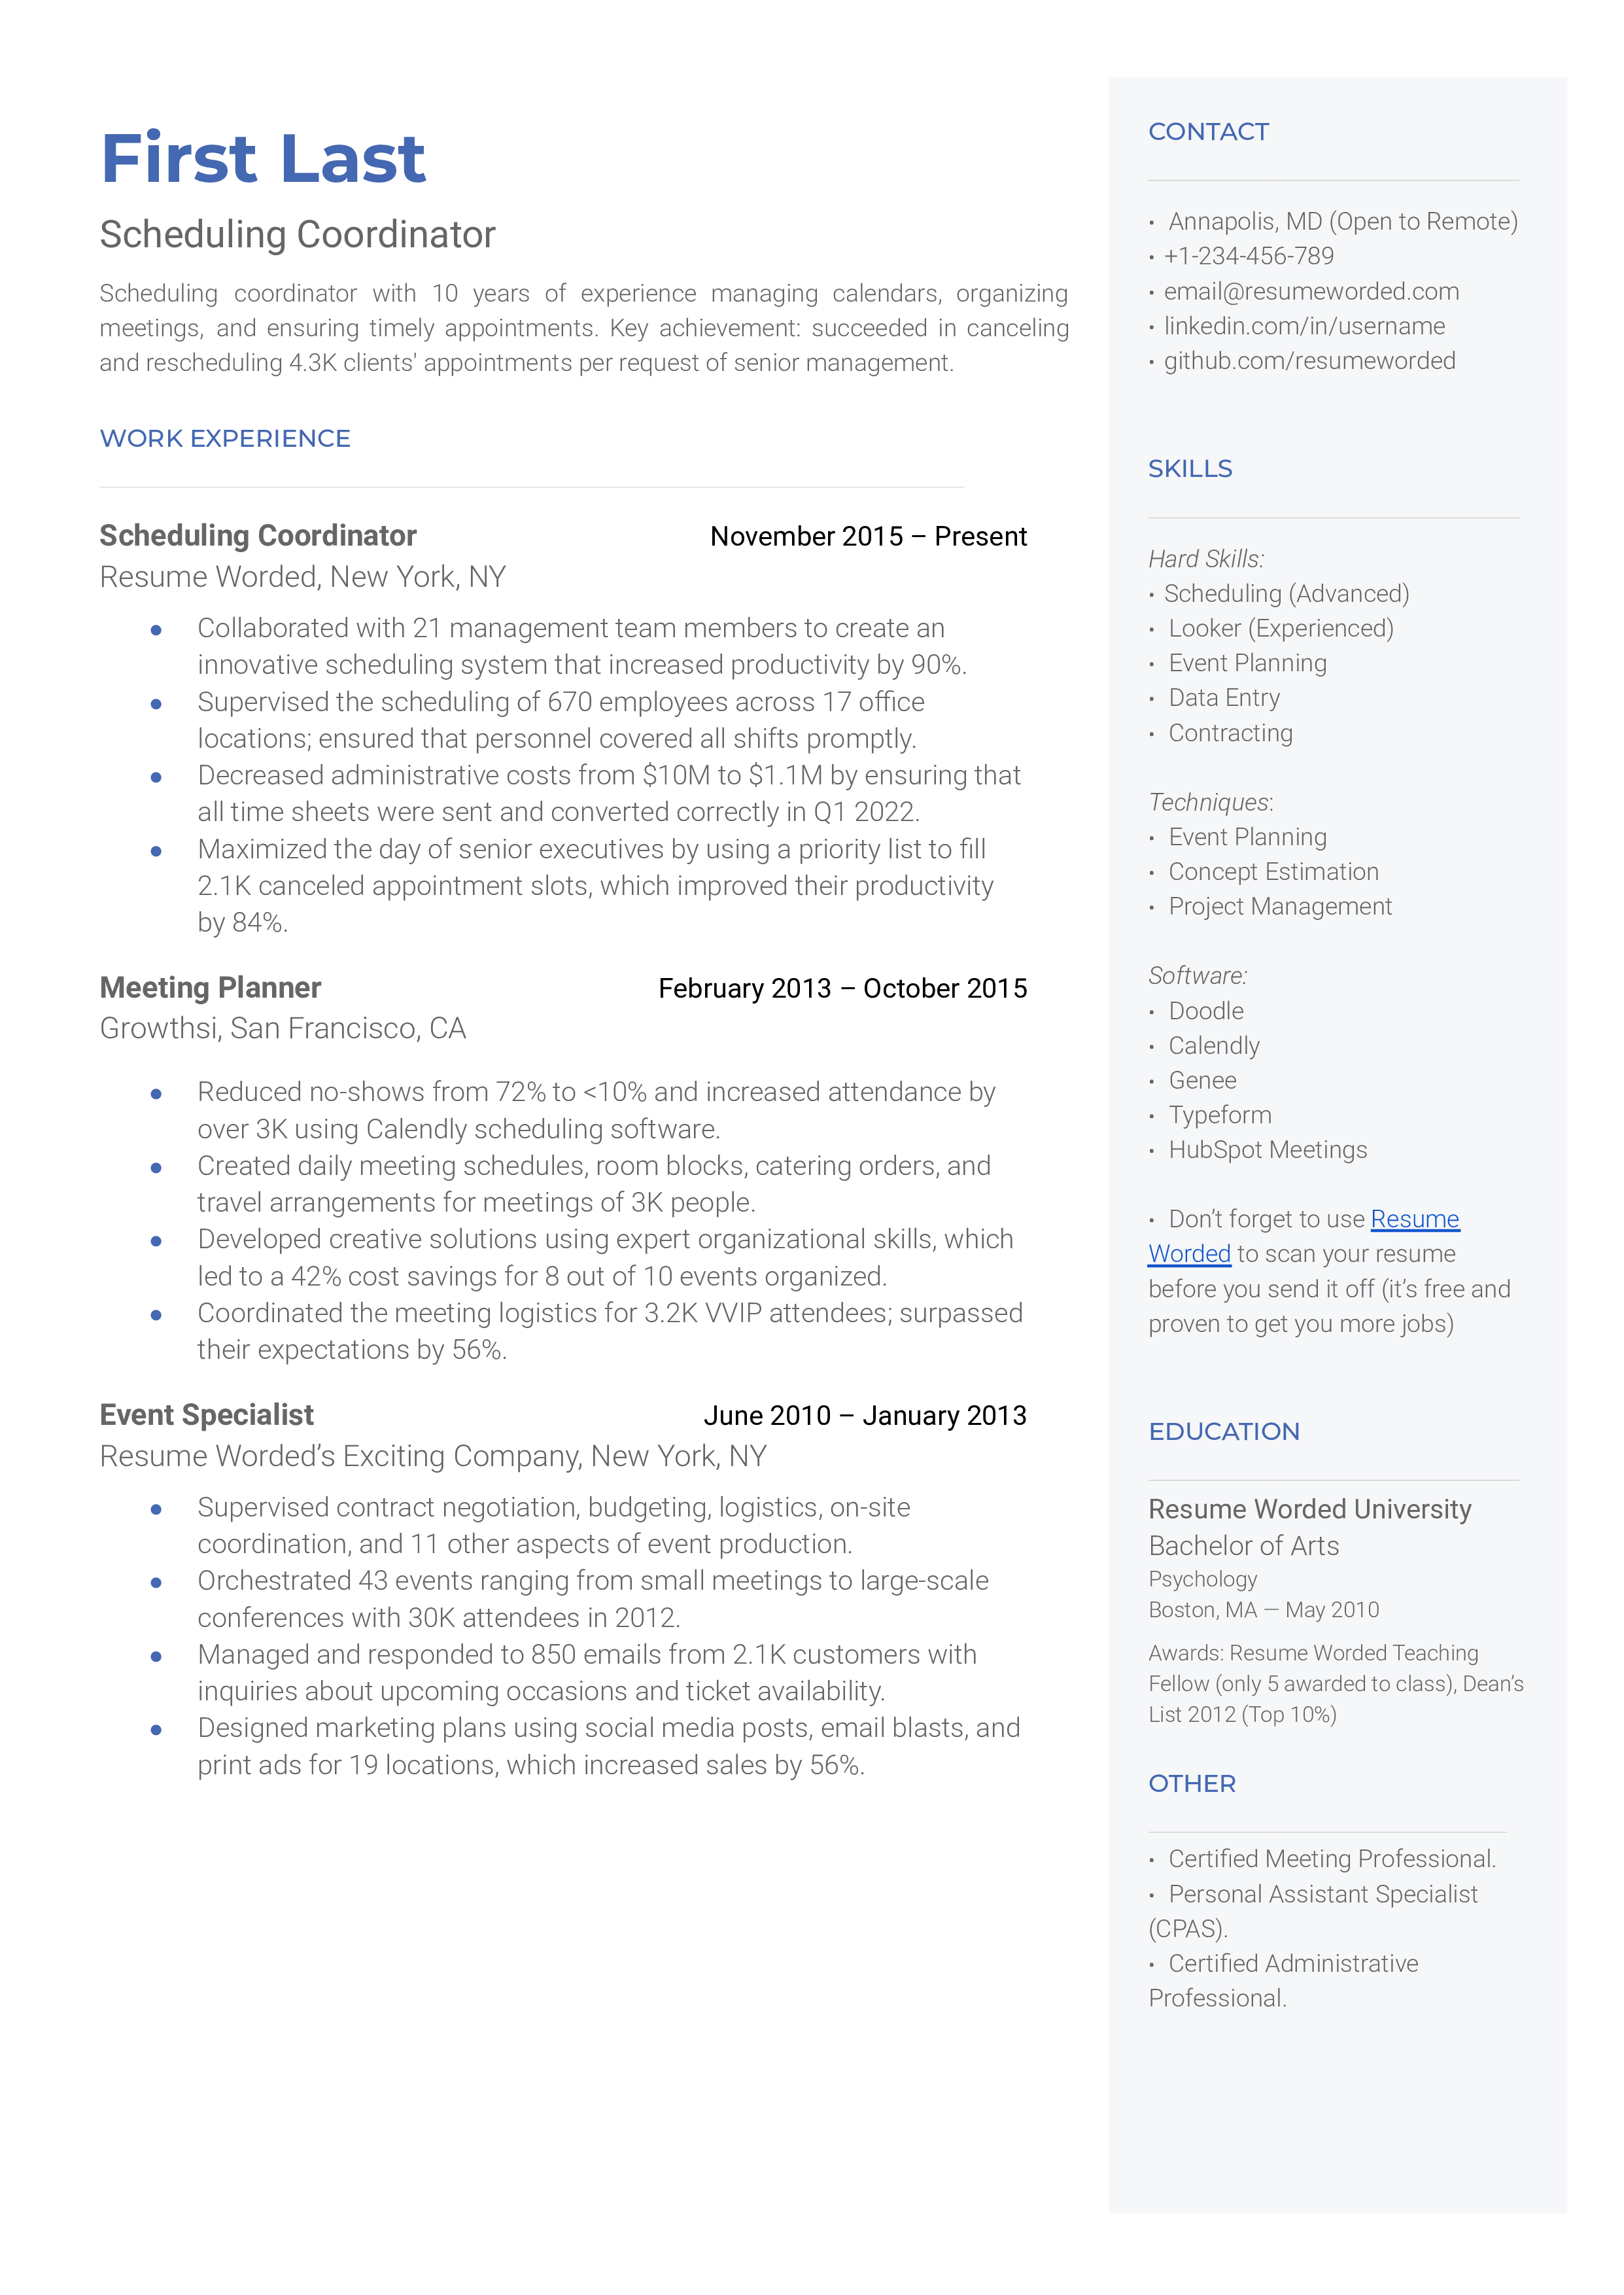 A scheduling coordinator resume template that highlights technical skills